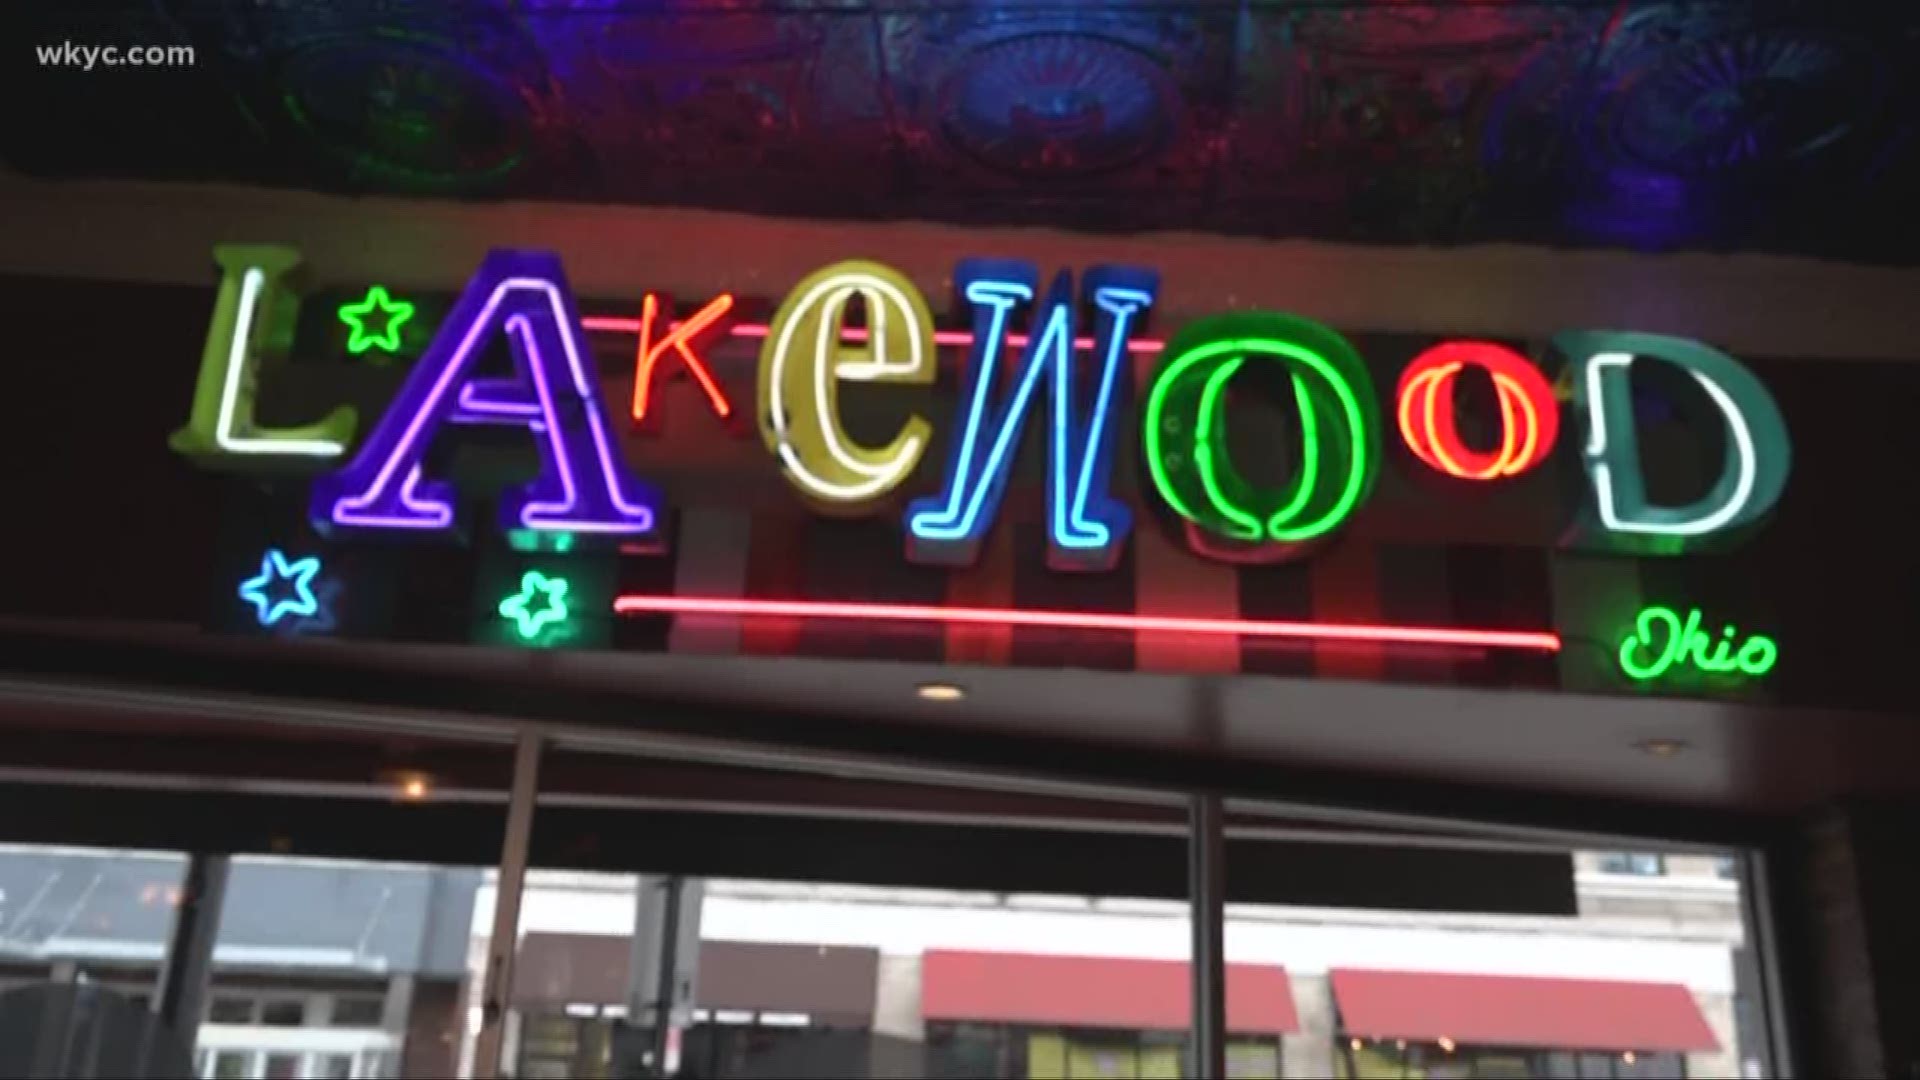 Feb. 21, 2018: WKYC's Jasmine Monroe drops by some of the hottest spots in Lakewood.